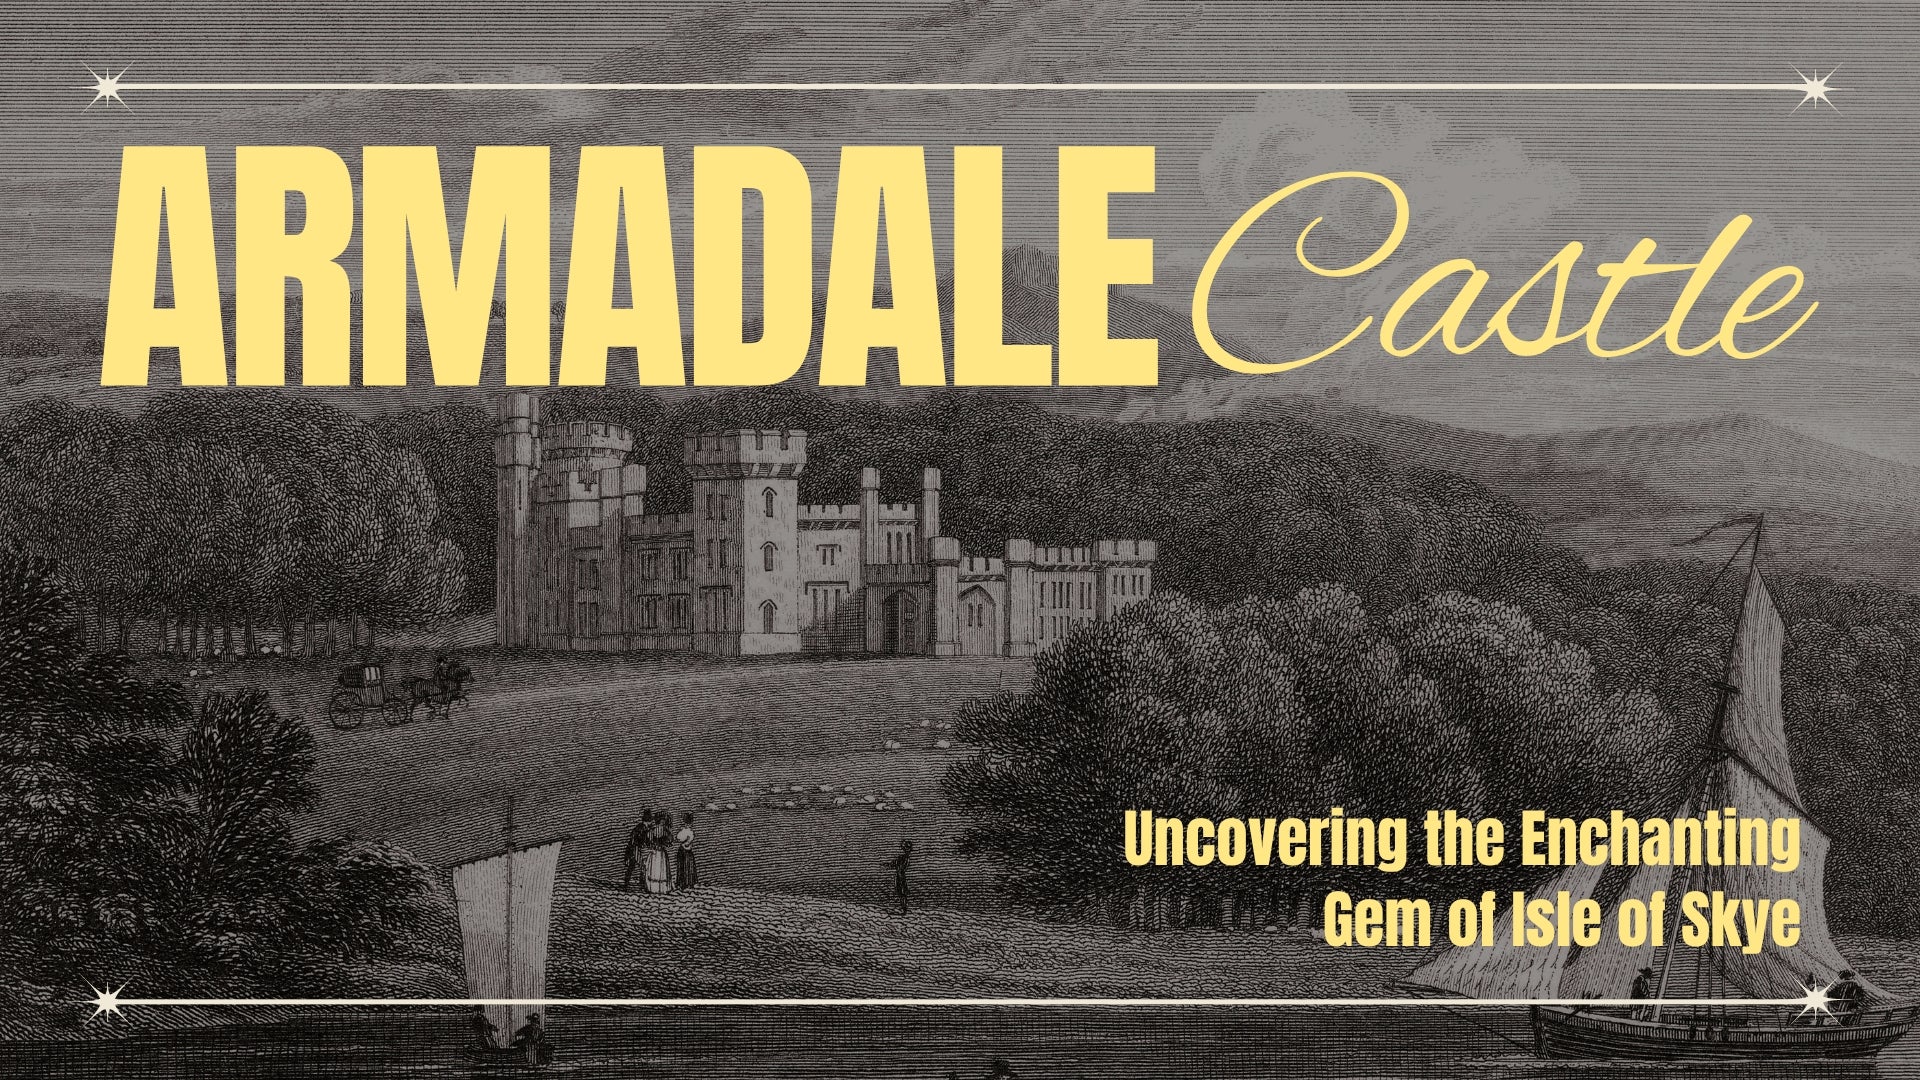 Armadale Castle: Uncovering the Enchanting Gem of Isle of Skye